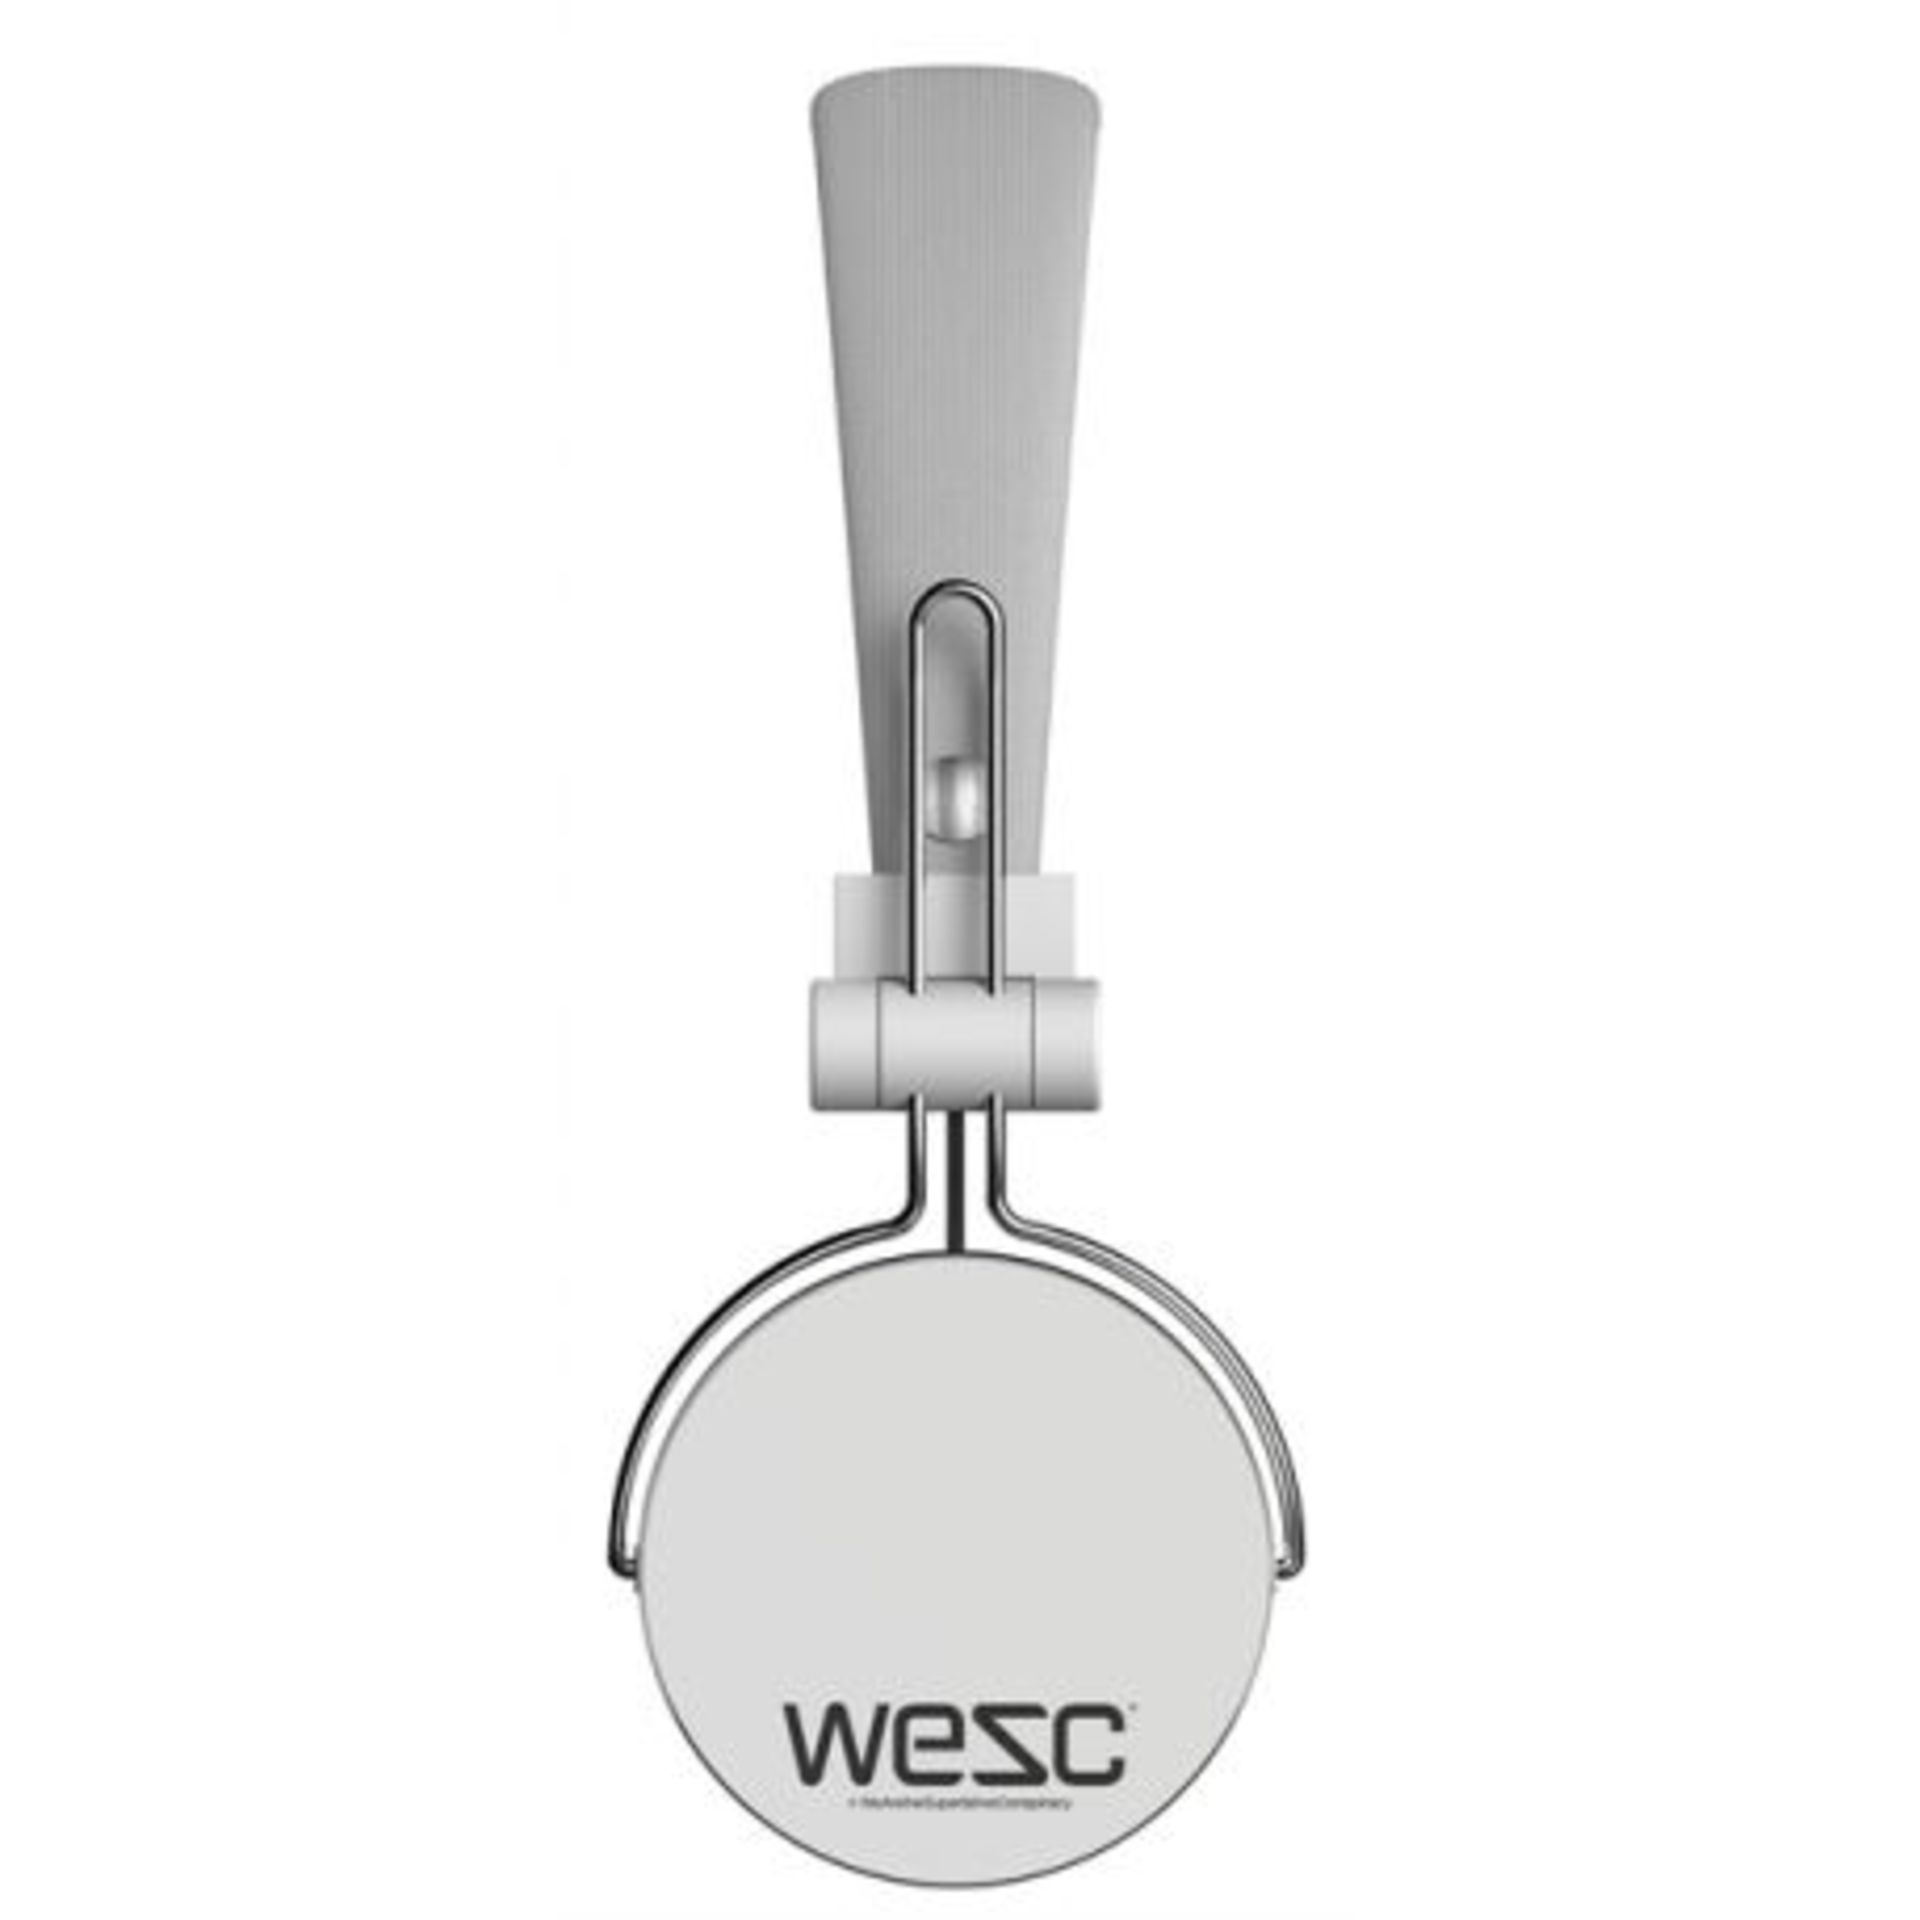 V *TRADE QTY* Brand New WESC M30 On-Ear Wired Headphones - 40mm Power Drivers - 3.5mm Gold Plated